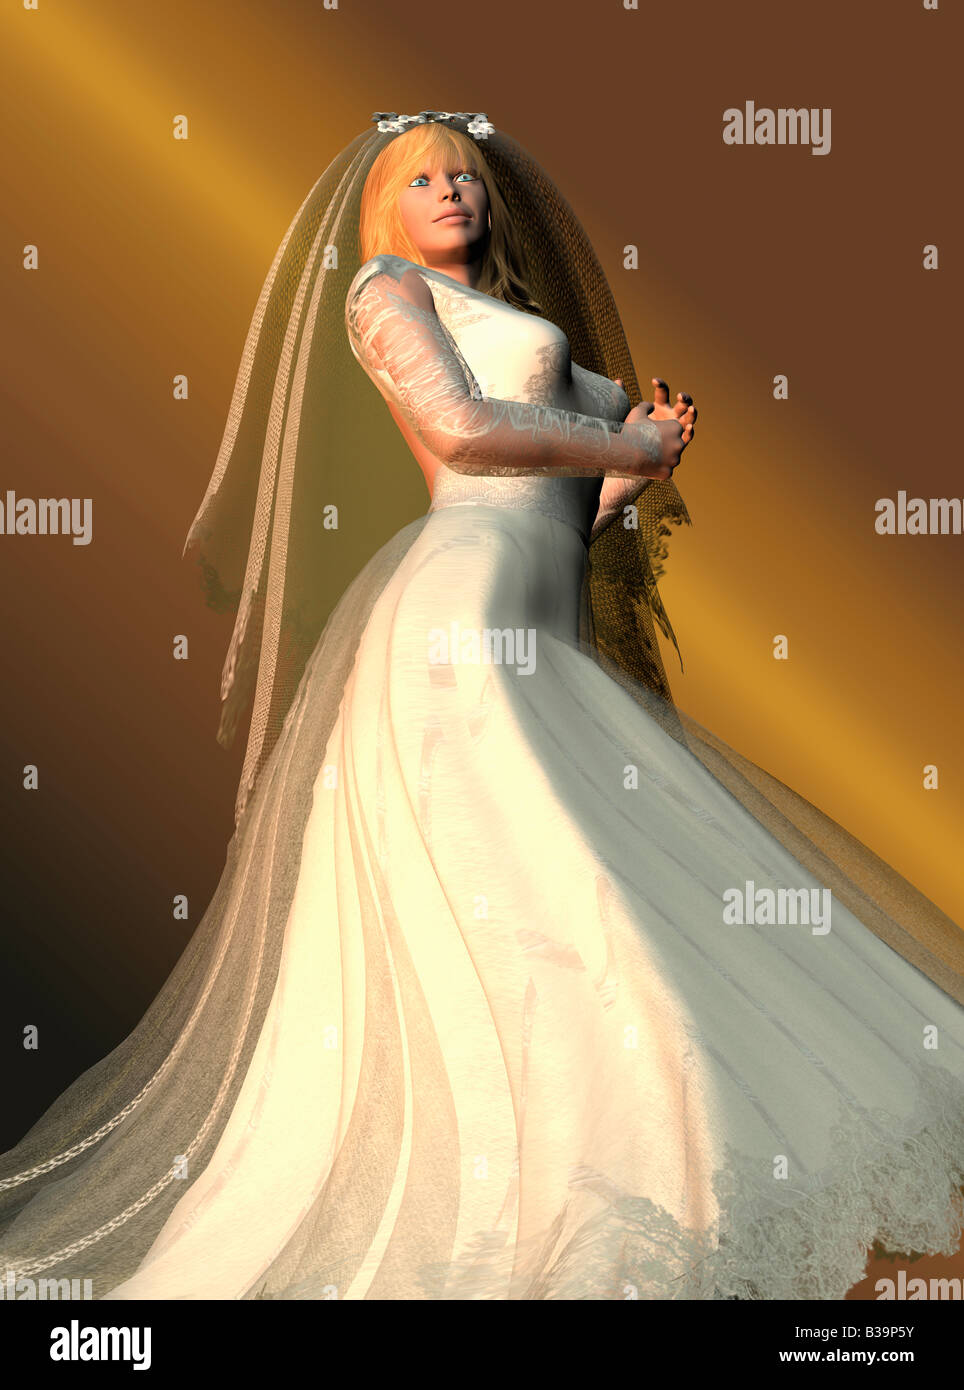 Computer Illustration Of Woman In Wedding Dress Stock Photo